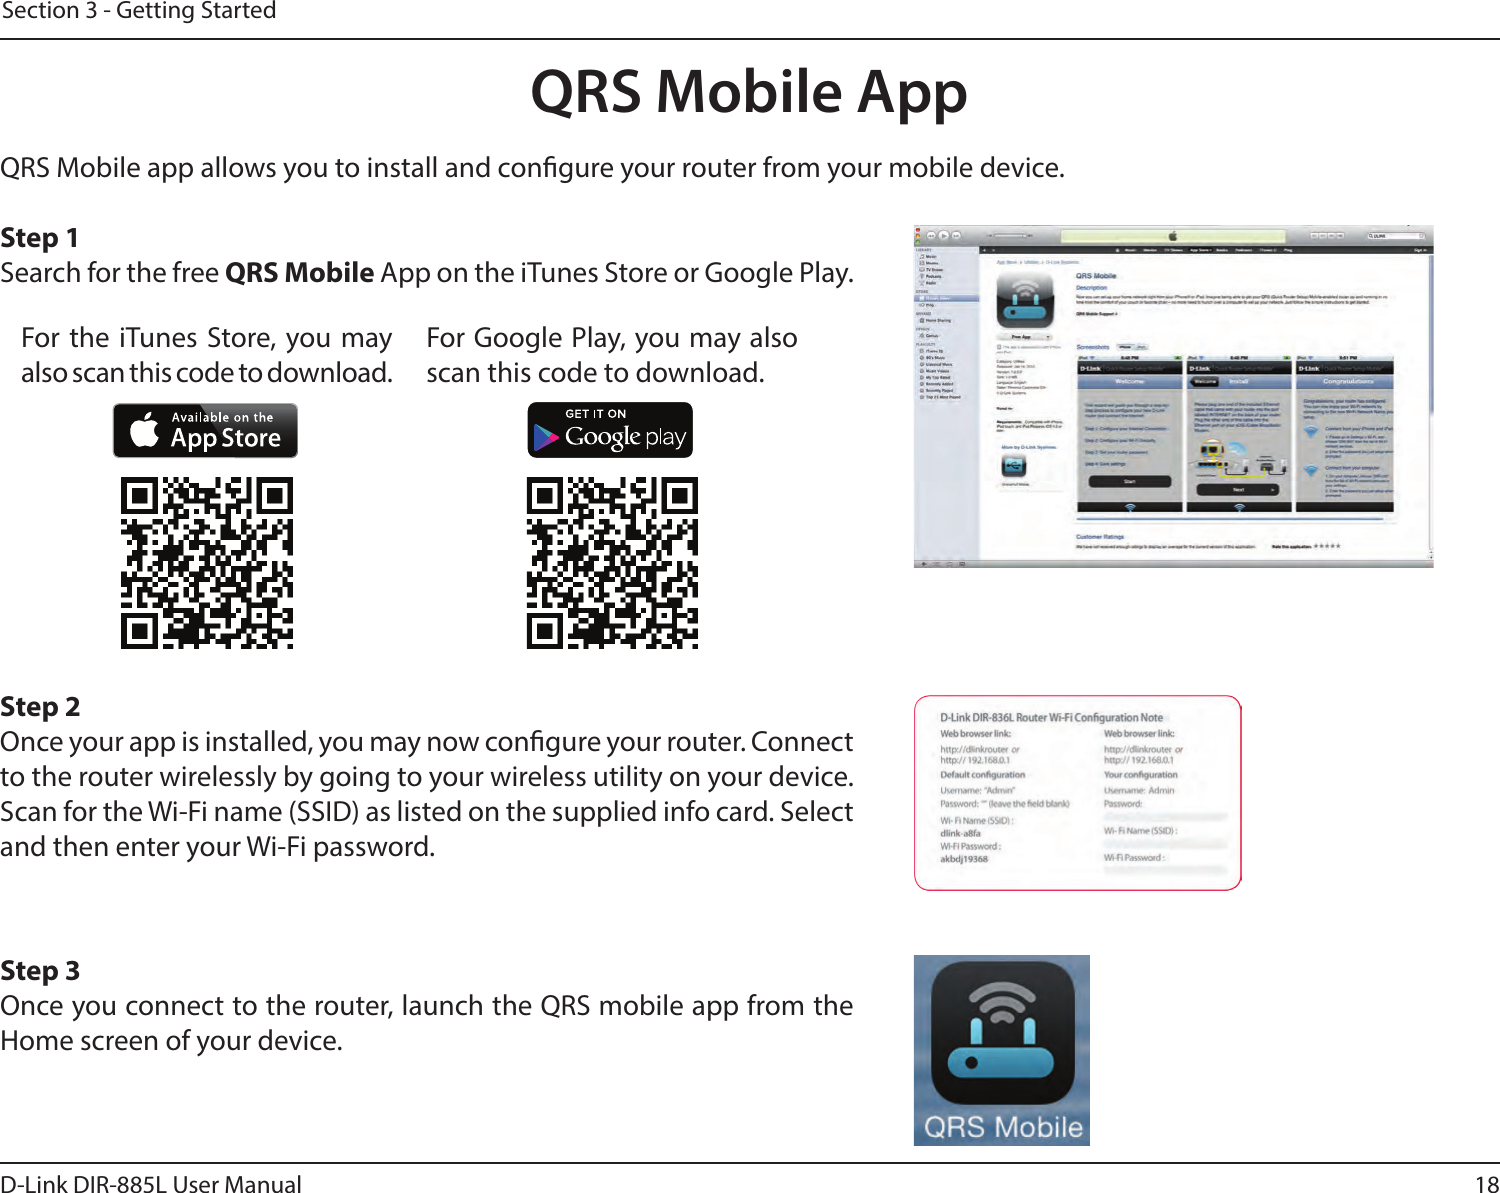 18D-Link DIR-885L User ManualSection 3 - Getting StartedQRS Mobile AppQRS Mobile app allows you to install and congure your router from your mobile device. Step 1Search for the free QRS Mobile App on the iTunes Store or Google Play.Step 2Once your app is installed, you may now congure your router. Connect to the router wirelessly by going to your wireless utility on your device. Scan for the Wi-Fi name (SSID) as listed on the supplied info card. Select and then enter your Wi-Fi password.Step 3Once you connect to the router, launch the QRS mobile app from the Home screen of your device.For the iTunes Store, you may also scan this code to download.For Google Play, you may also scan this code to download.